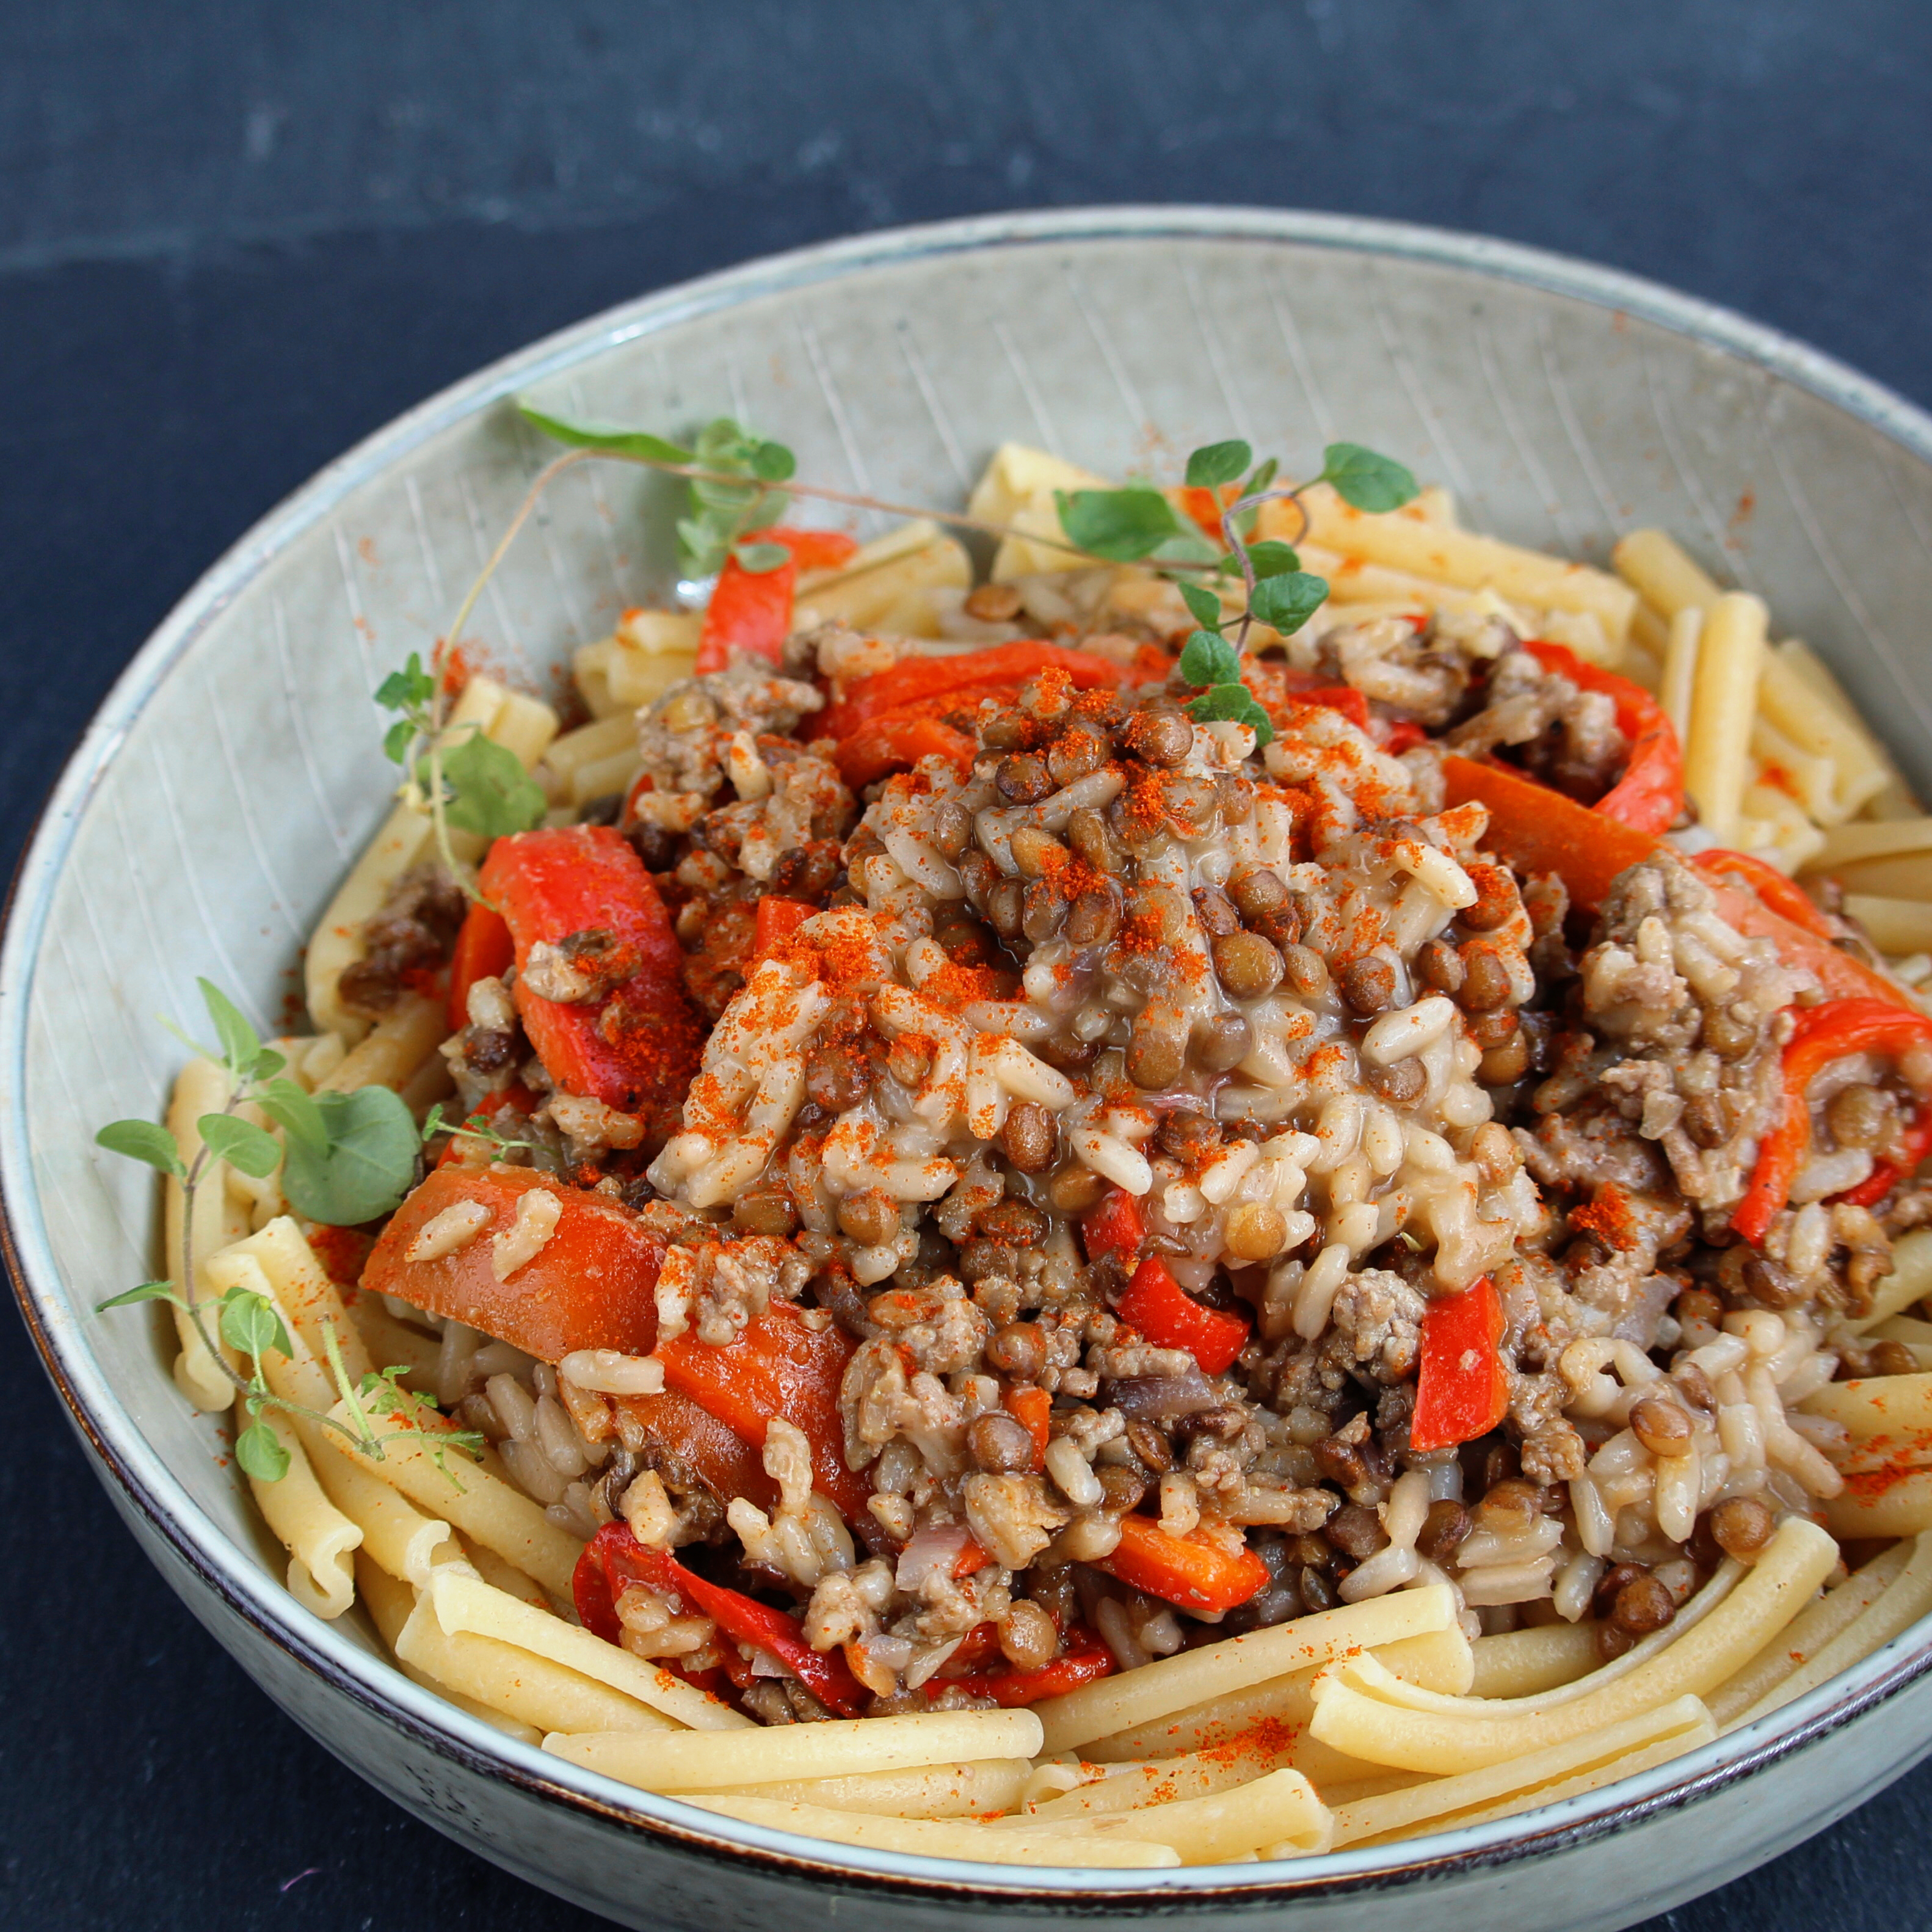 Lentils with Ground Beef and Rice